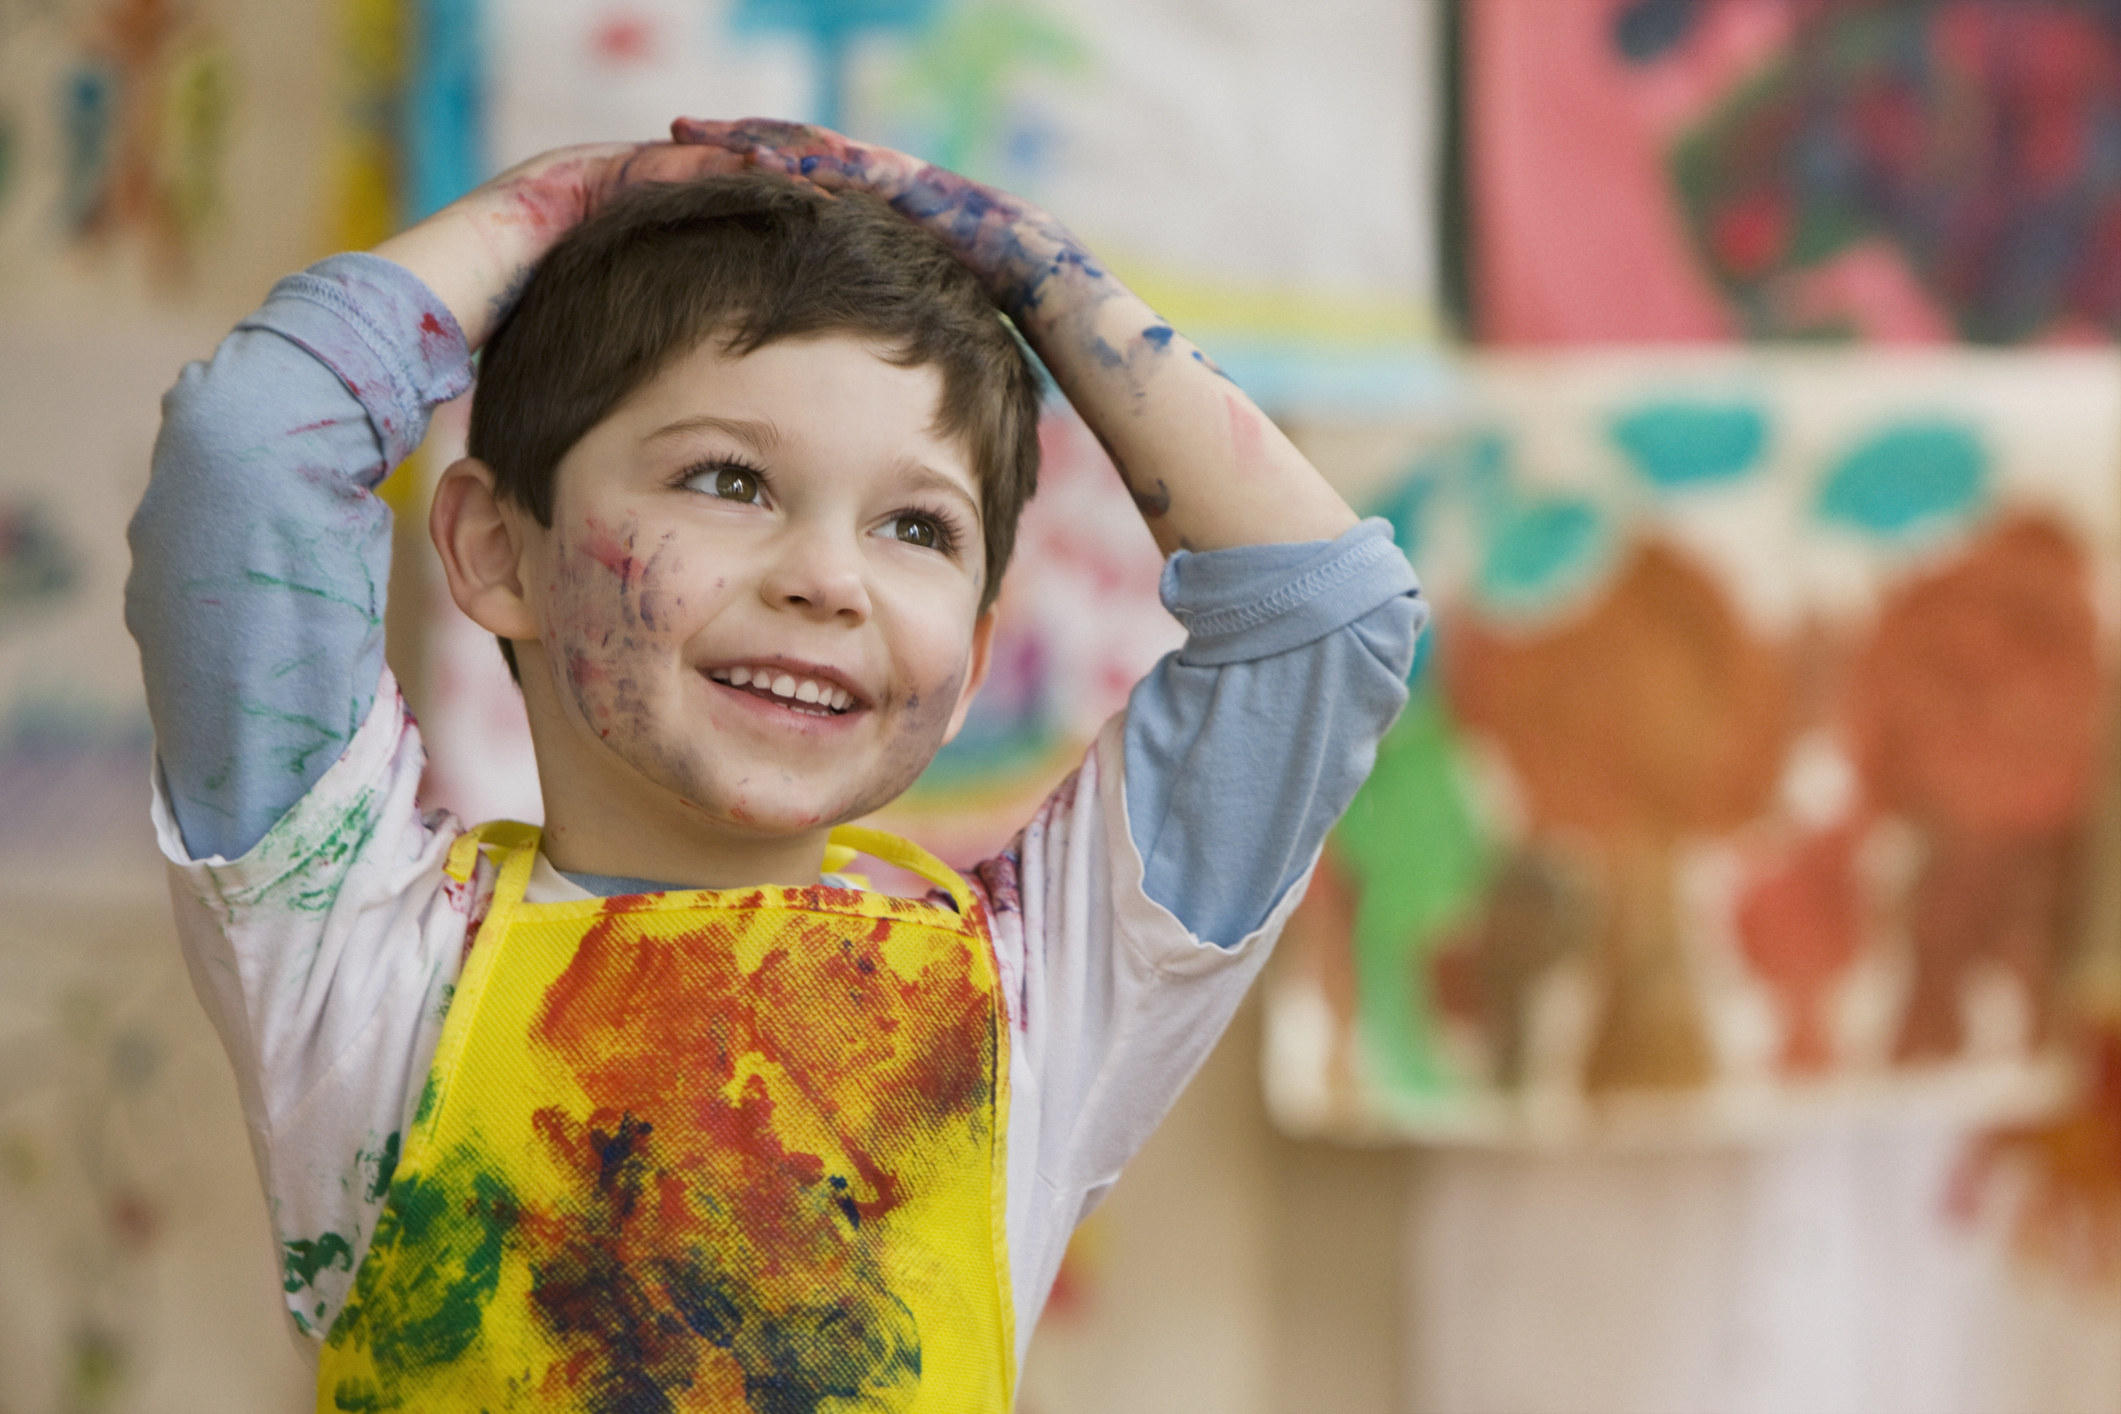 A student covered in paint